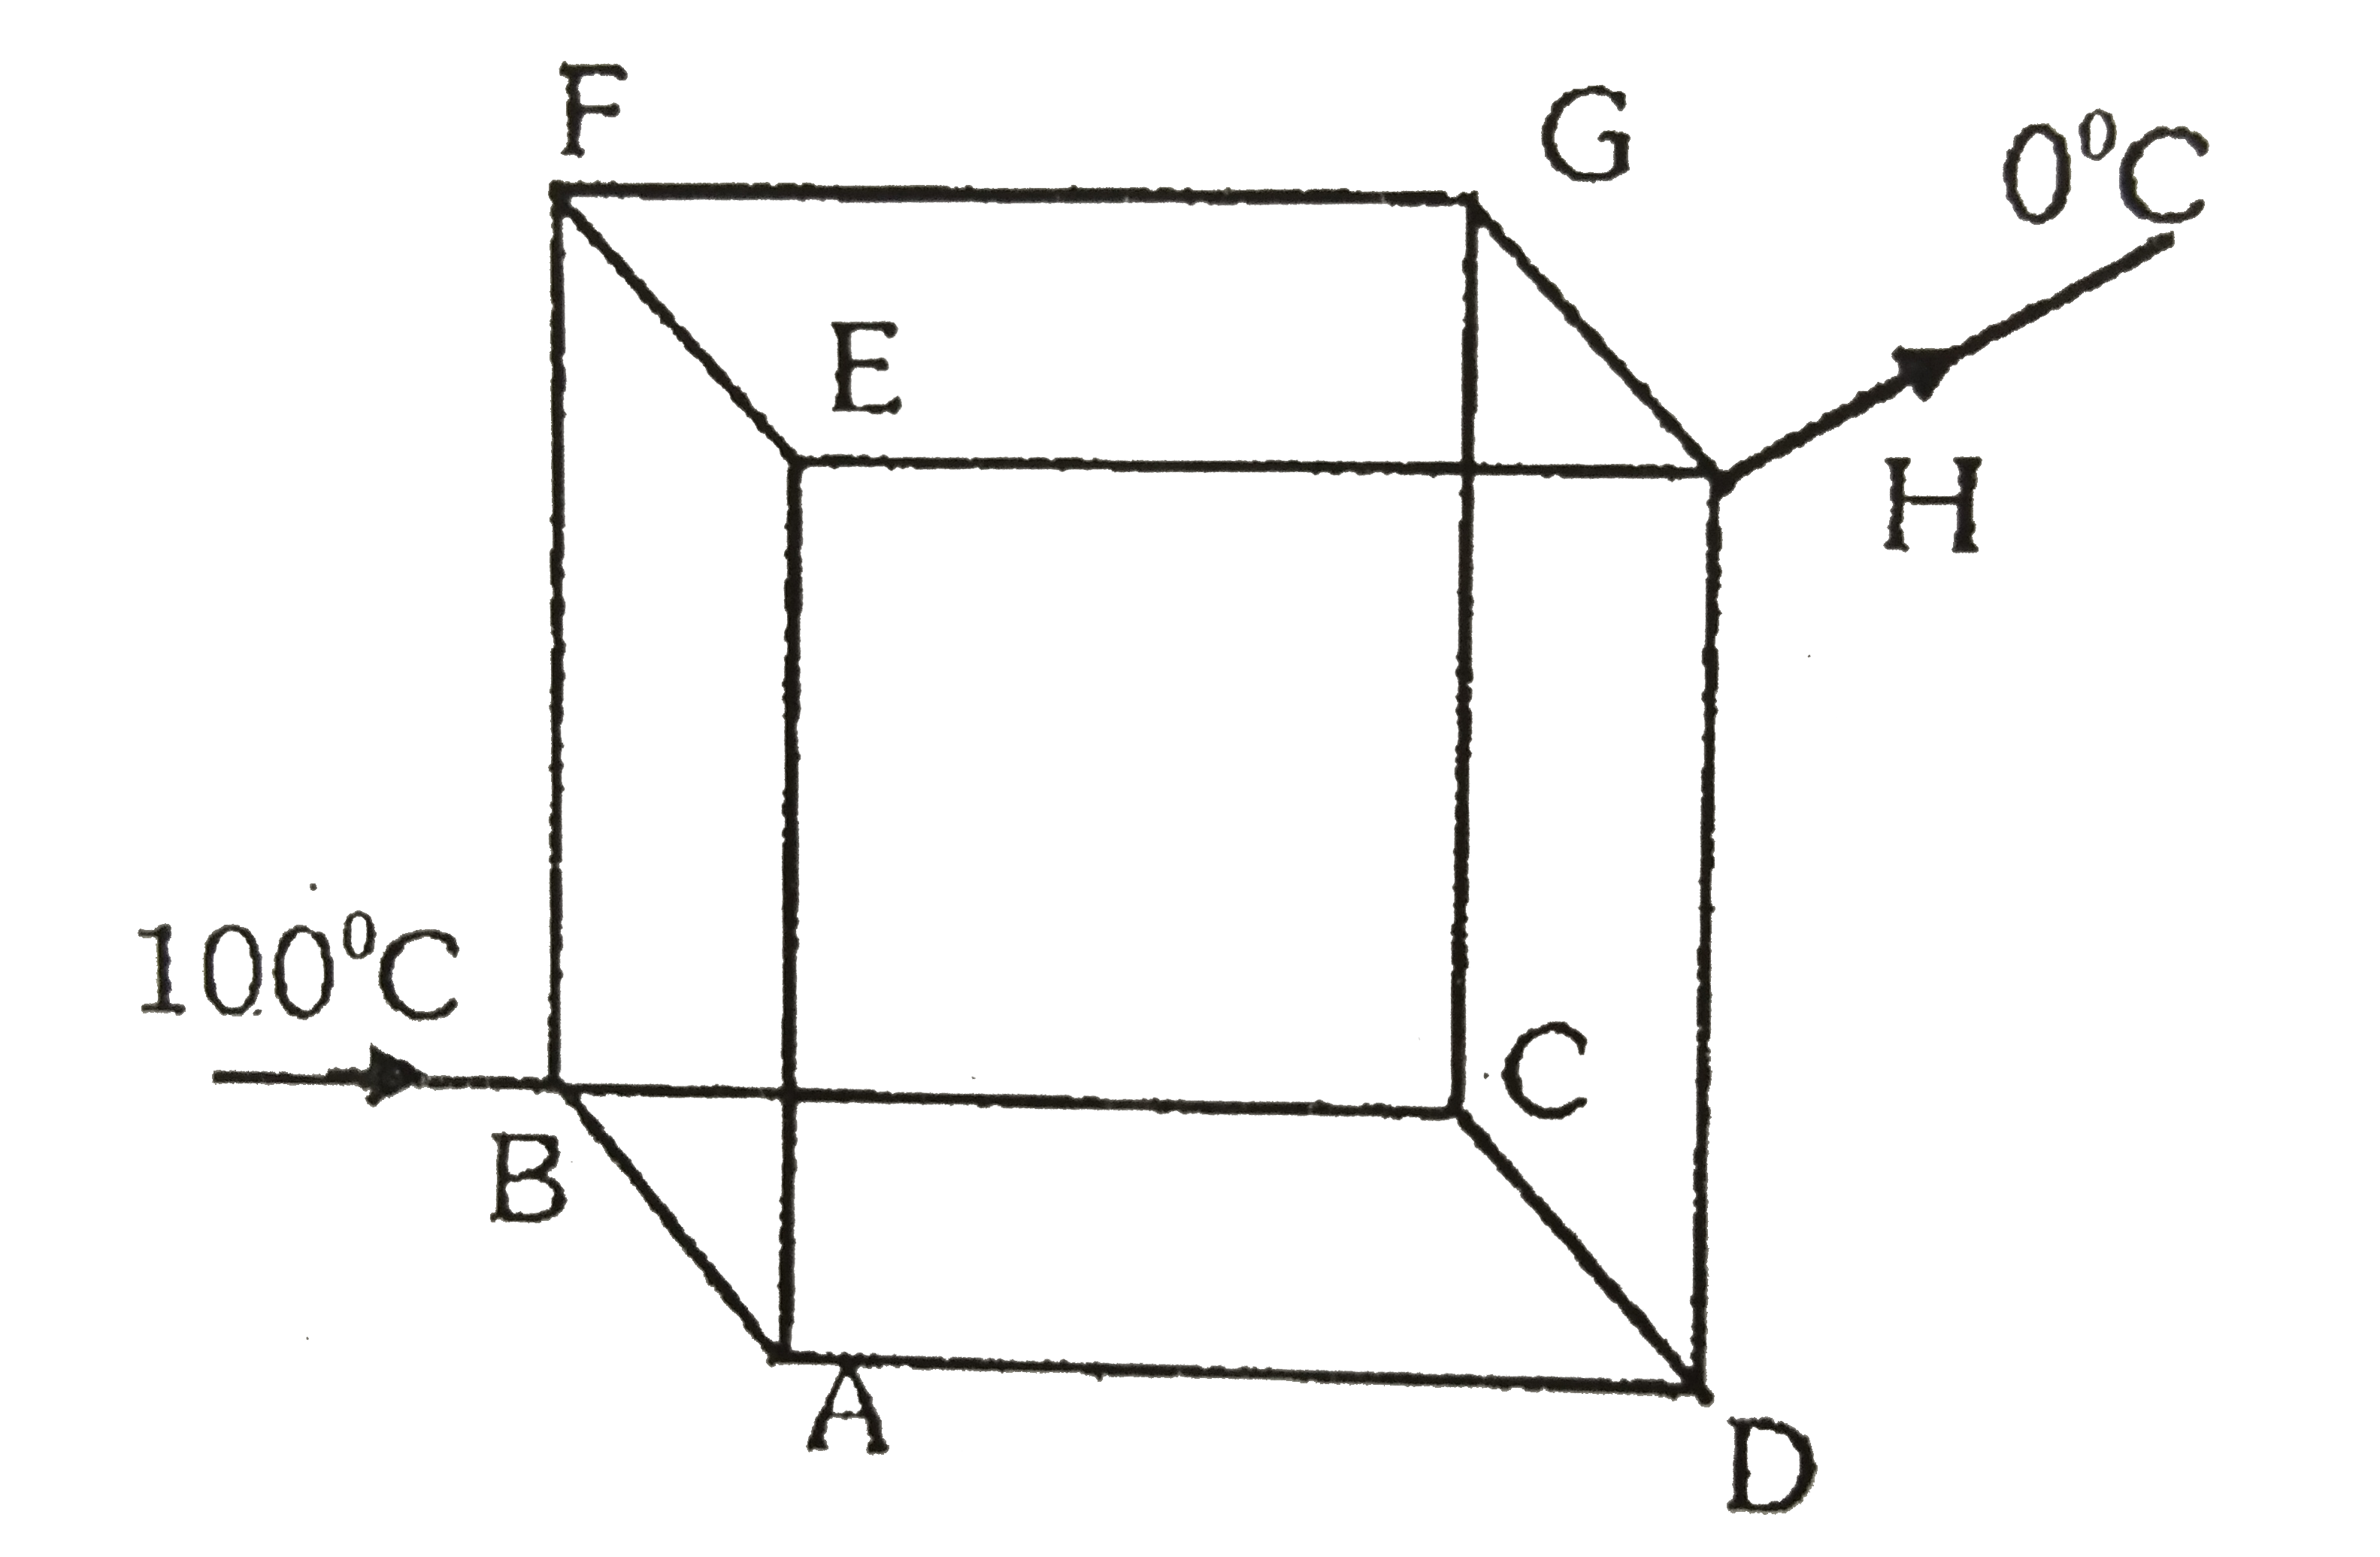 Twelve conducting rods from the sides of a uniform cube of side l. If in steady state, B and H ends of the cube are at 100^(@)C and 0^(@)C respectively. Find the temperature of the junction 'A' :-